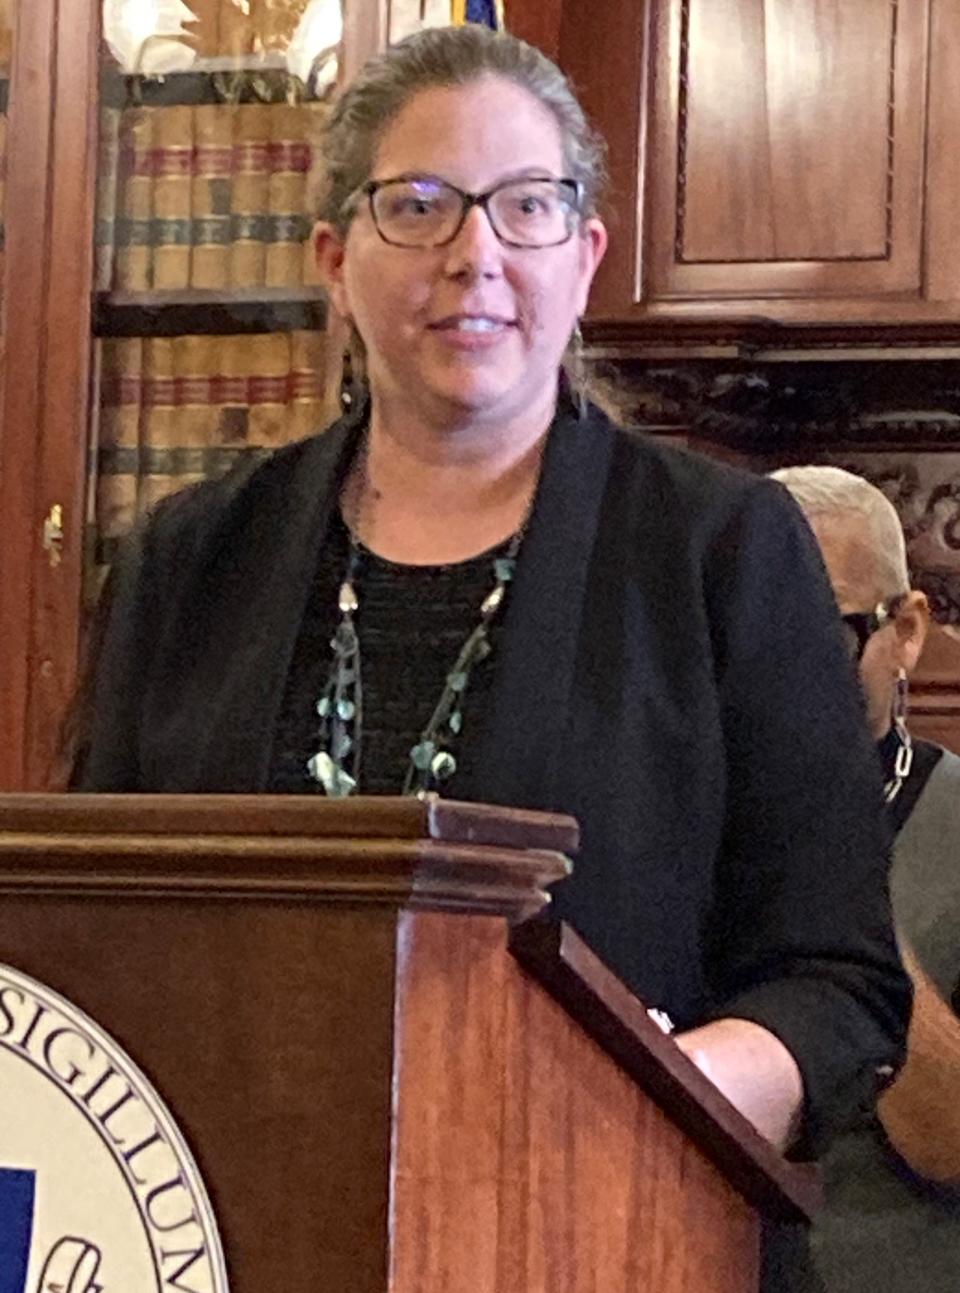 Rep. Natalie Higgins, D-Leominster, urged legislators Tuesday to fund a $20 million bump to the Massachusetts Office for Victim Assistance.